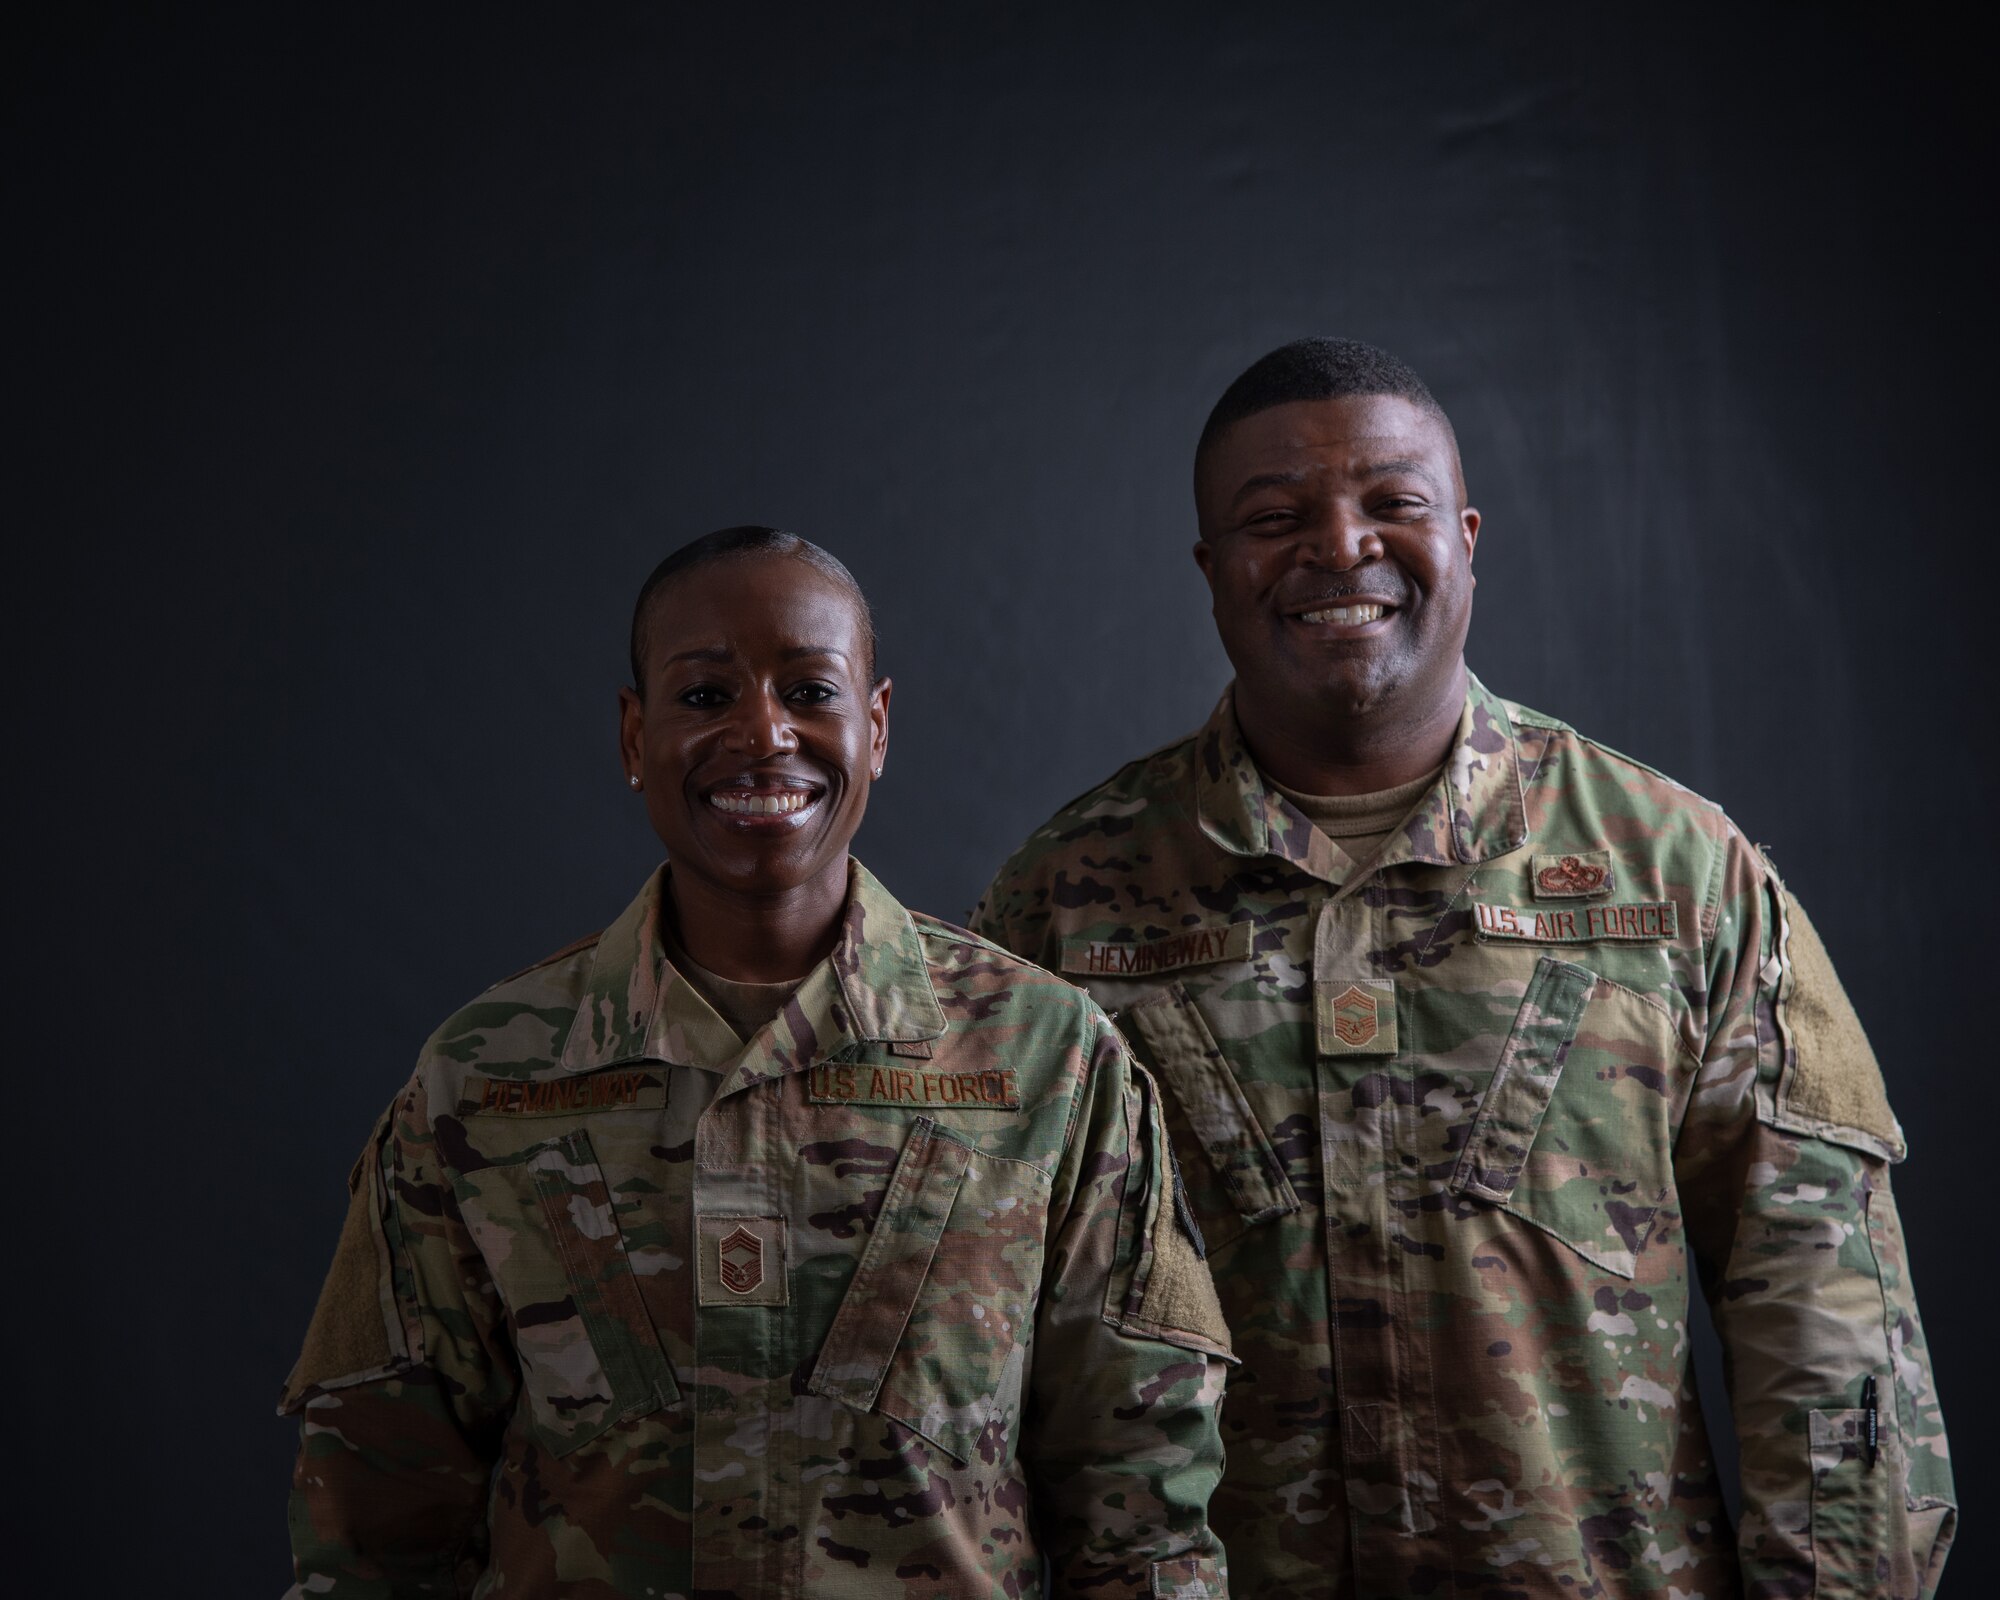 Chief Master Sergeant Rochelle Hemingway, 56th Aerospace Medicine Squadron superintendent, stands with her husband, Chief Master Sergeant Dominic Hemingway, 56th Maintenance Group superintendent.  They have weathered the ups and downs that come with any demanding job and cheered each other on through the ranks as they climbed to the top one percent of the enlisted force. (U.S. Air Force photo by A1C Aspen Reid)